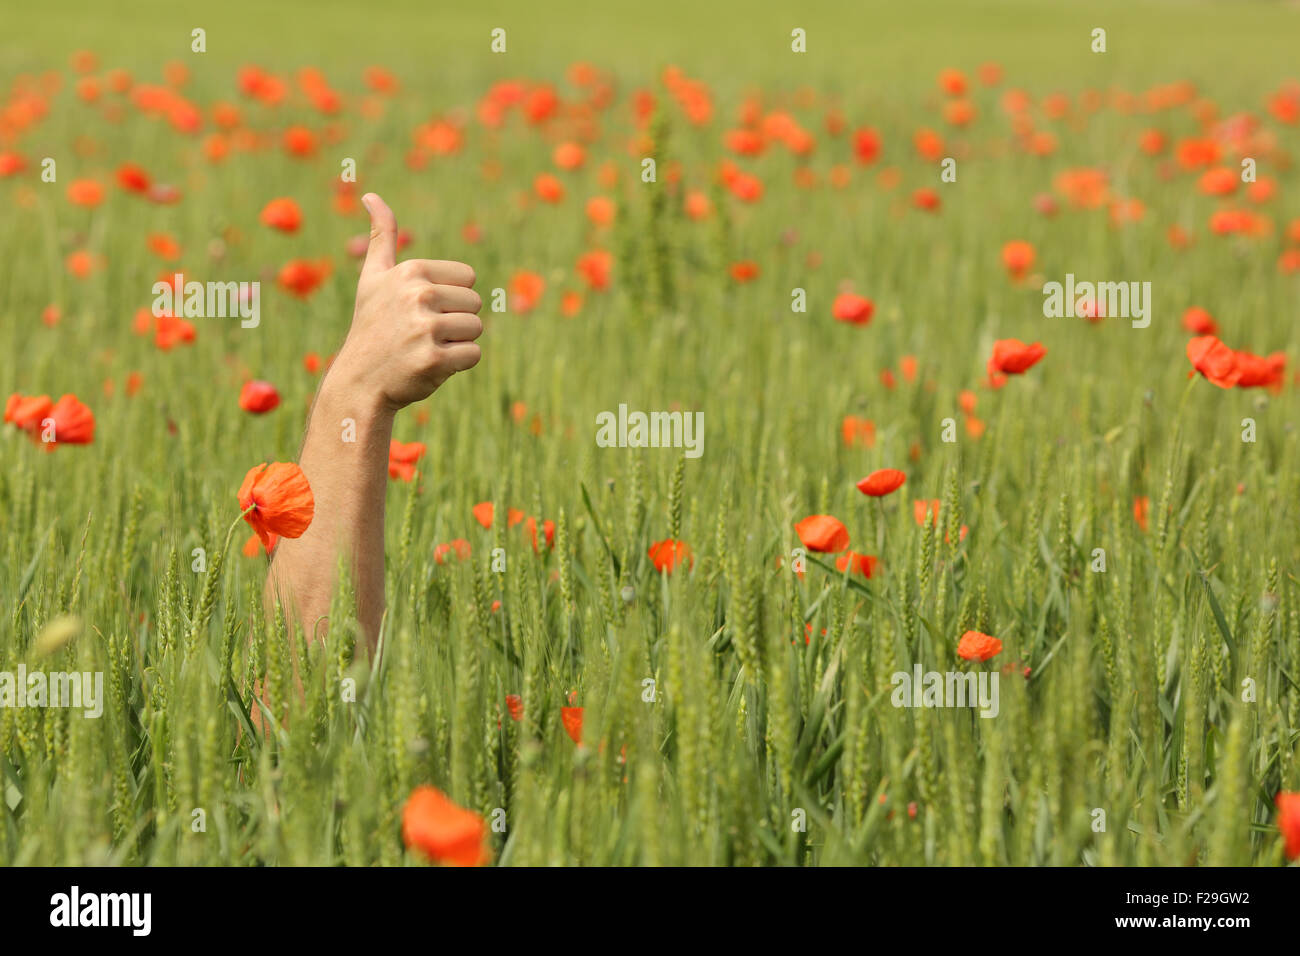 Hand with thumbs up in the middle of a wheat meadow with red poppy flowers Stock Photo